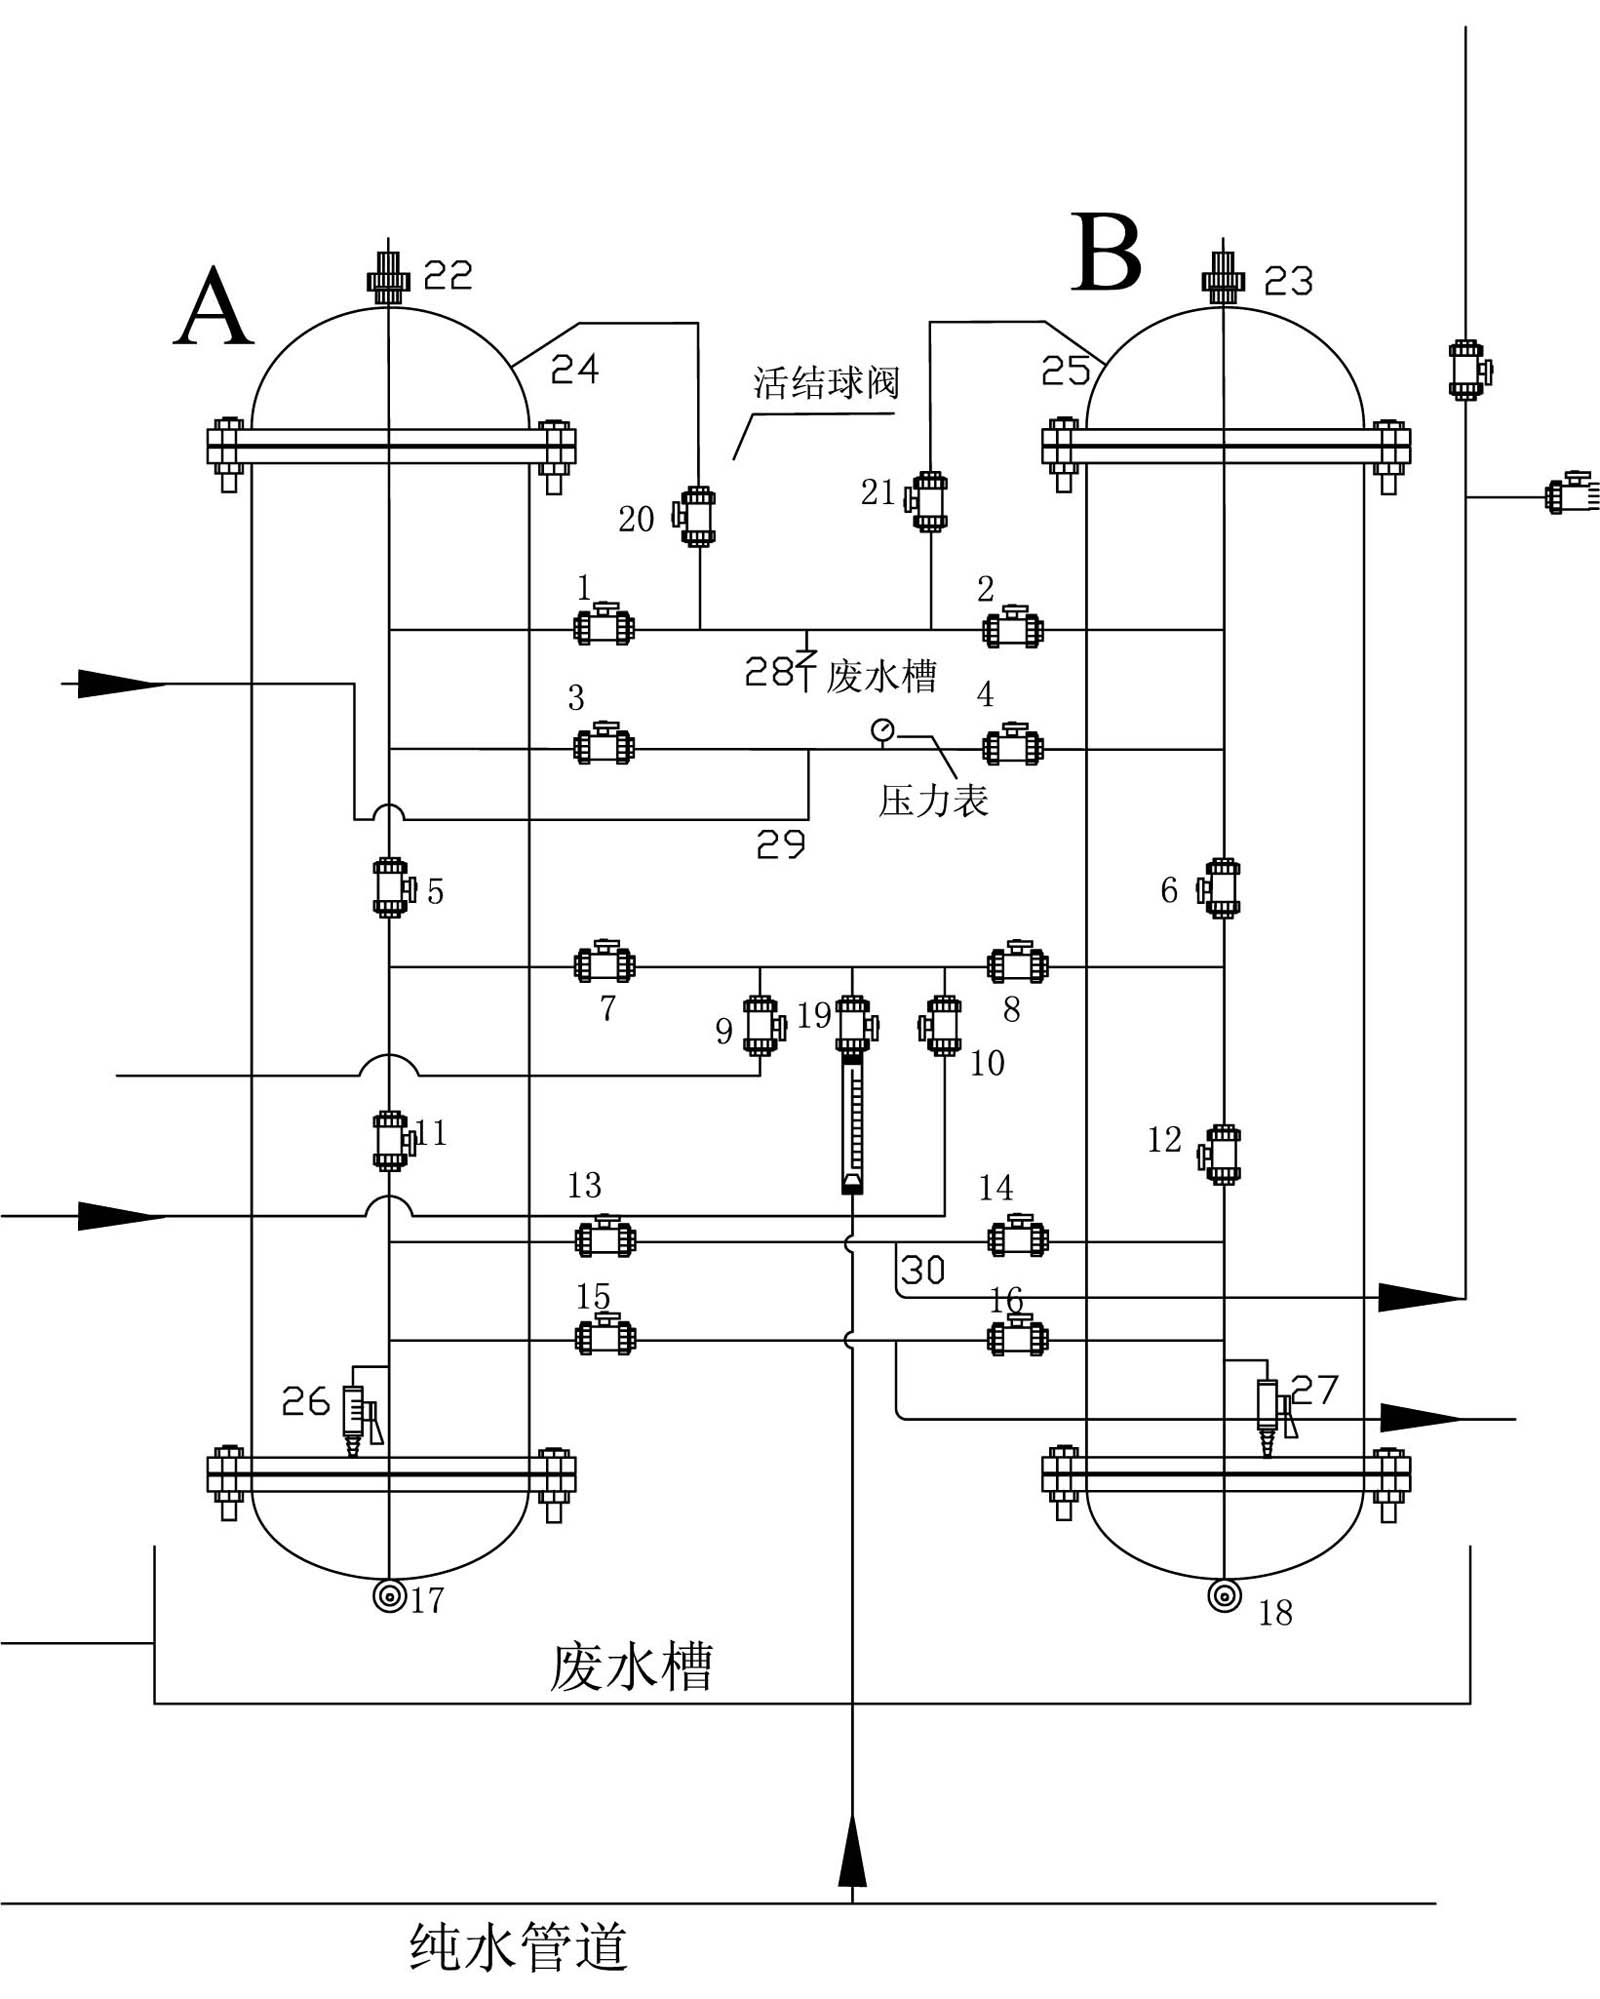 Method and device for recovering nickel resource and water resource in nickel plating wastewater